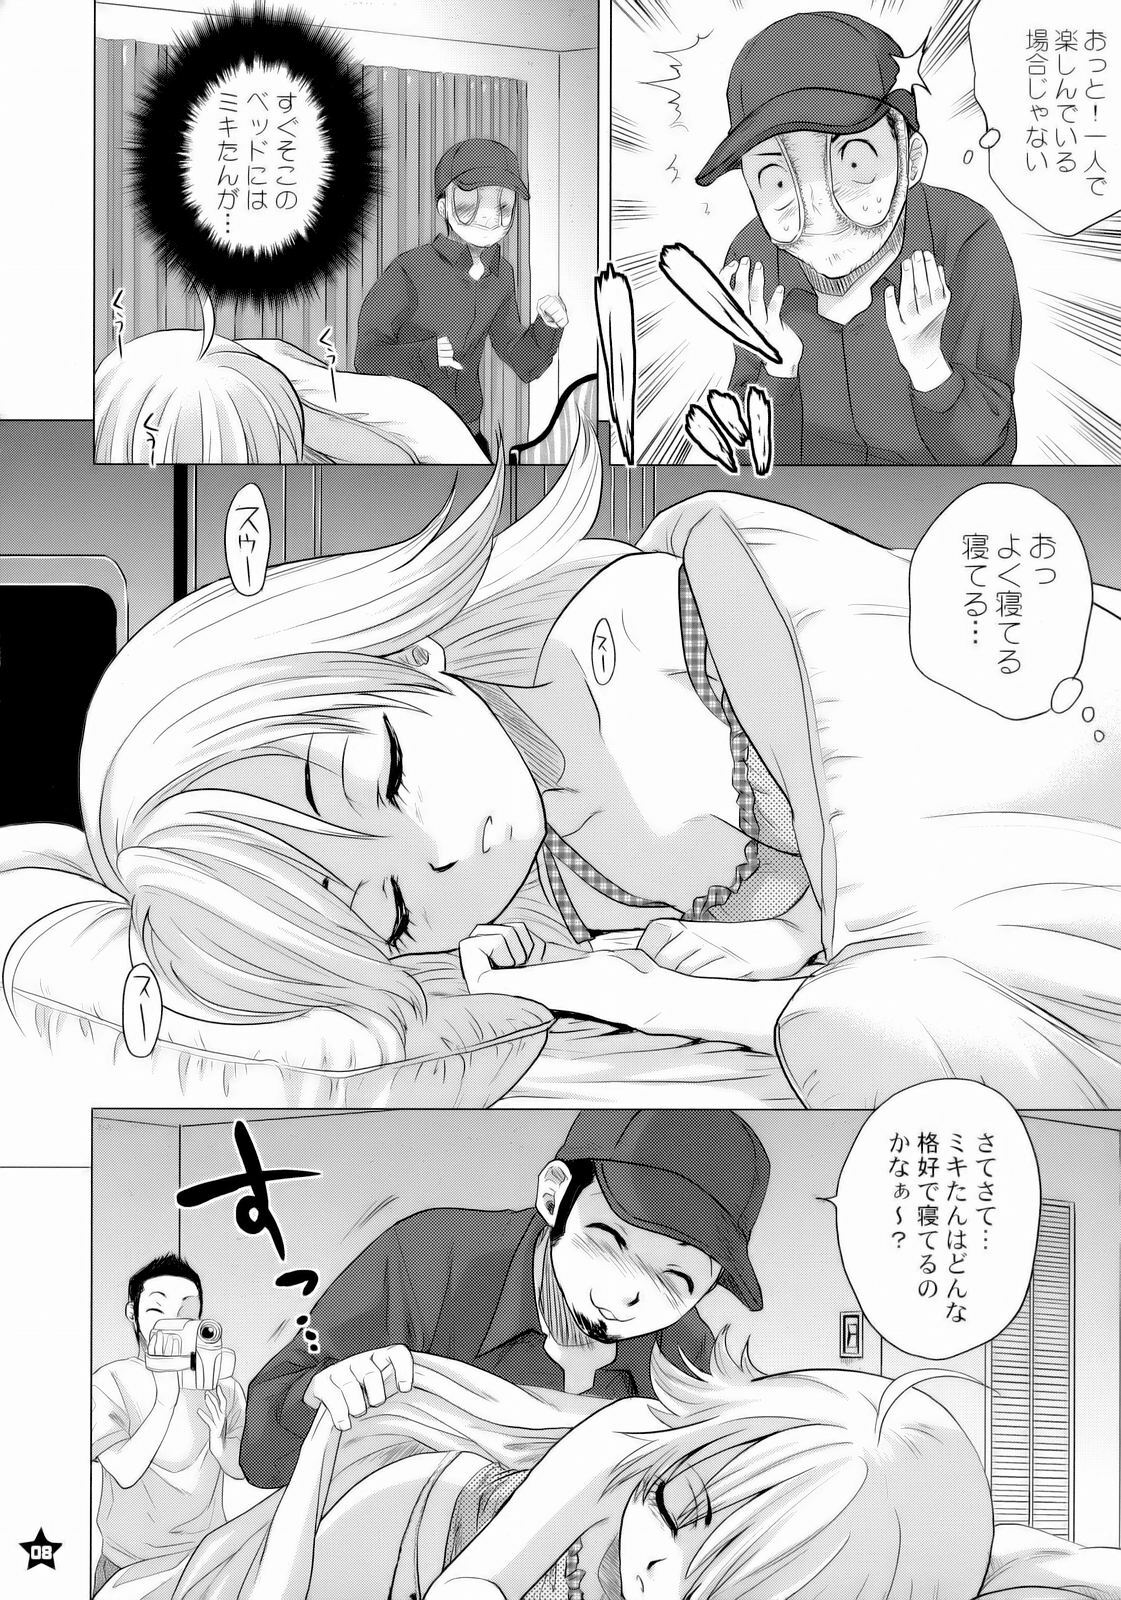 (C72) [Todd Special (Todd Oyamada)] Dokkiri-relations (THE IDOLM@STER) page 7 full